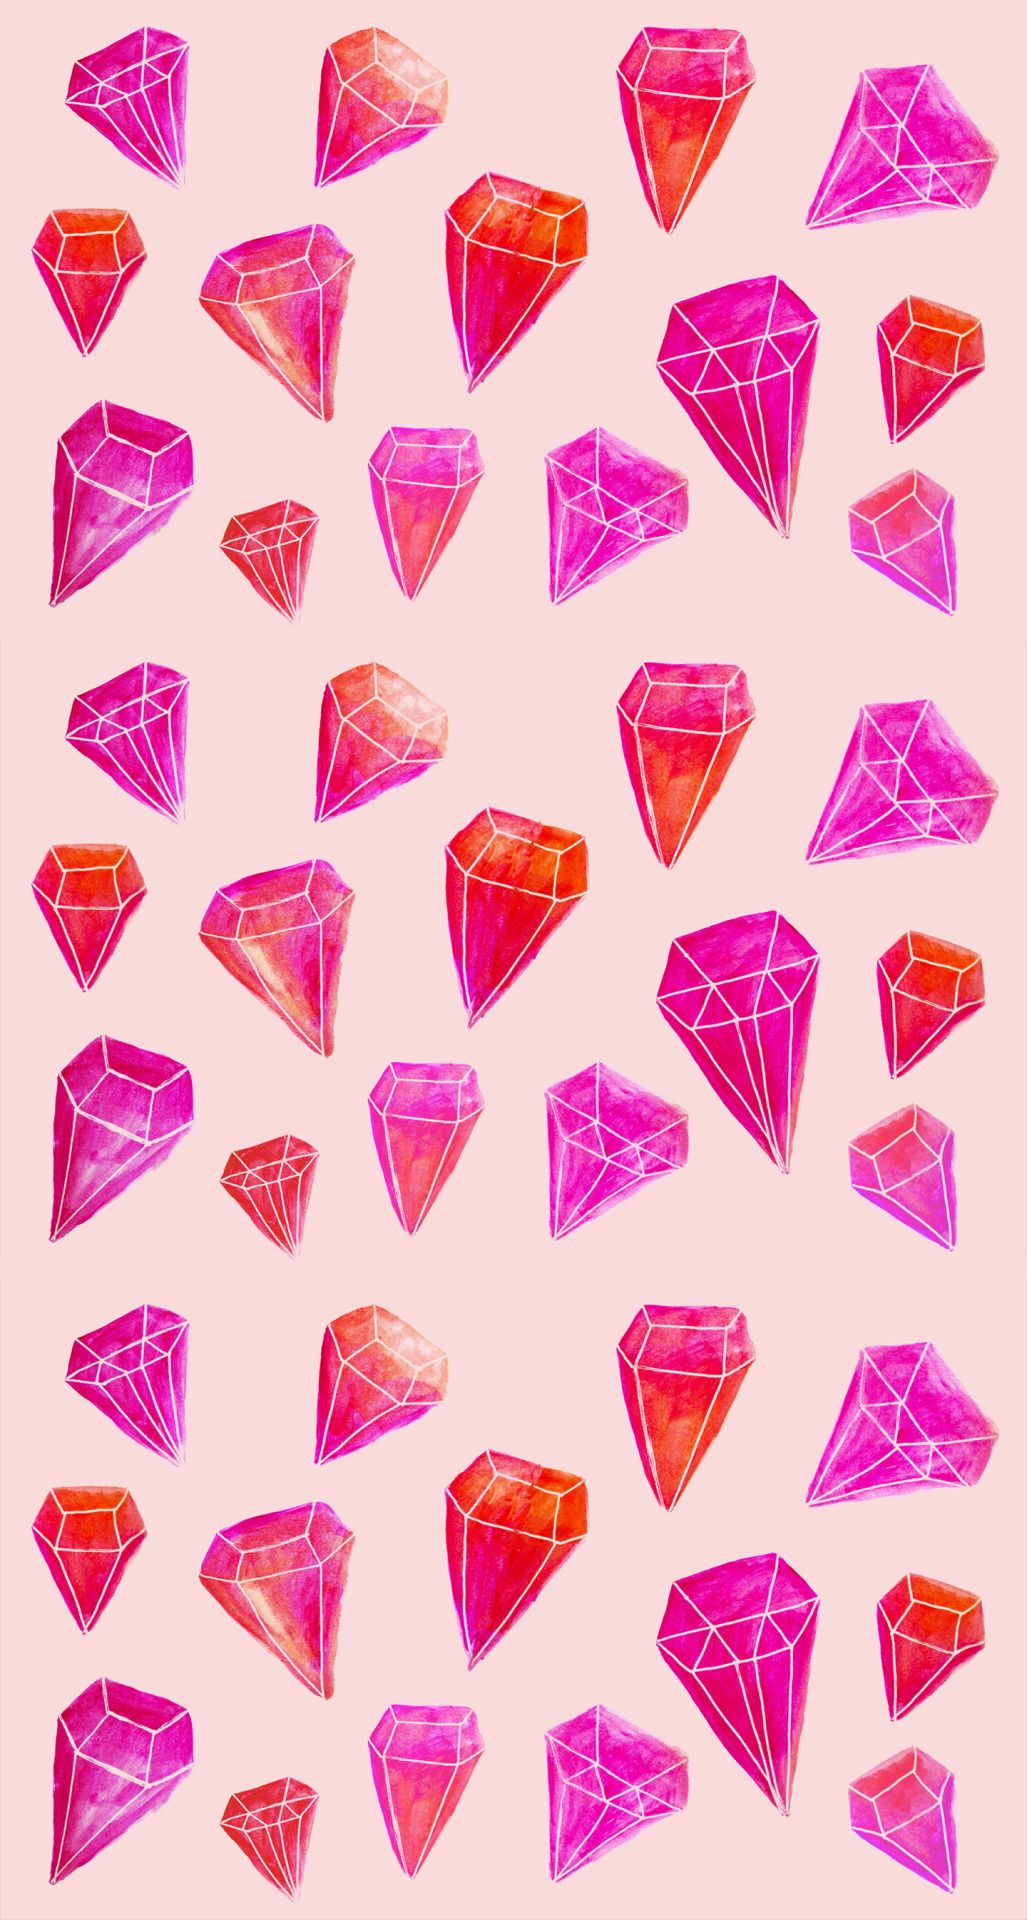 A phone wallpaper I made! You can download it for free on the blog. - Diamond